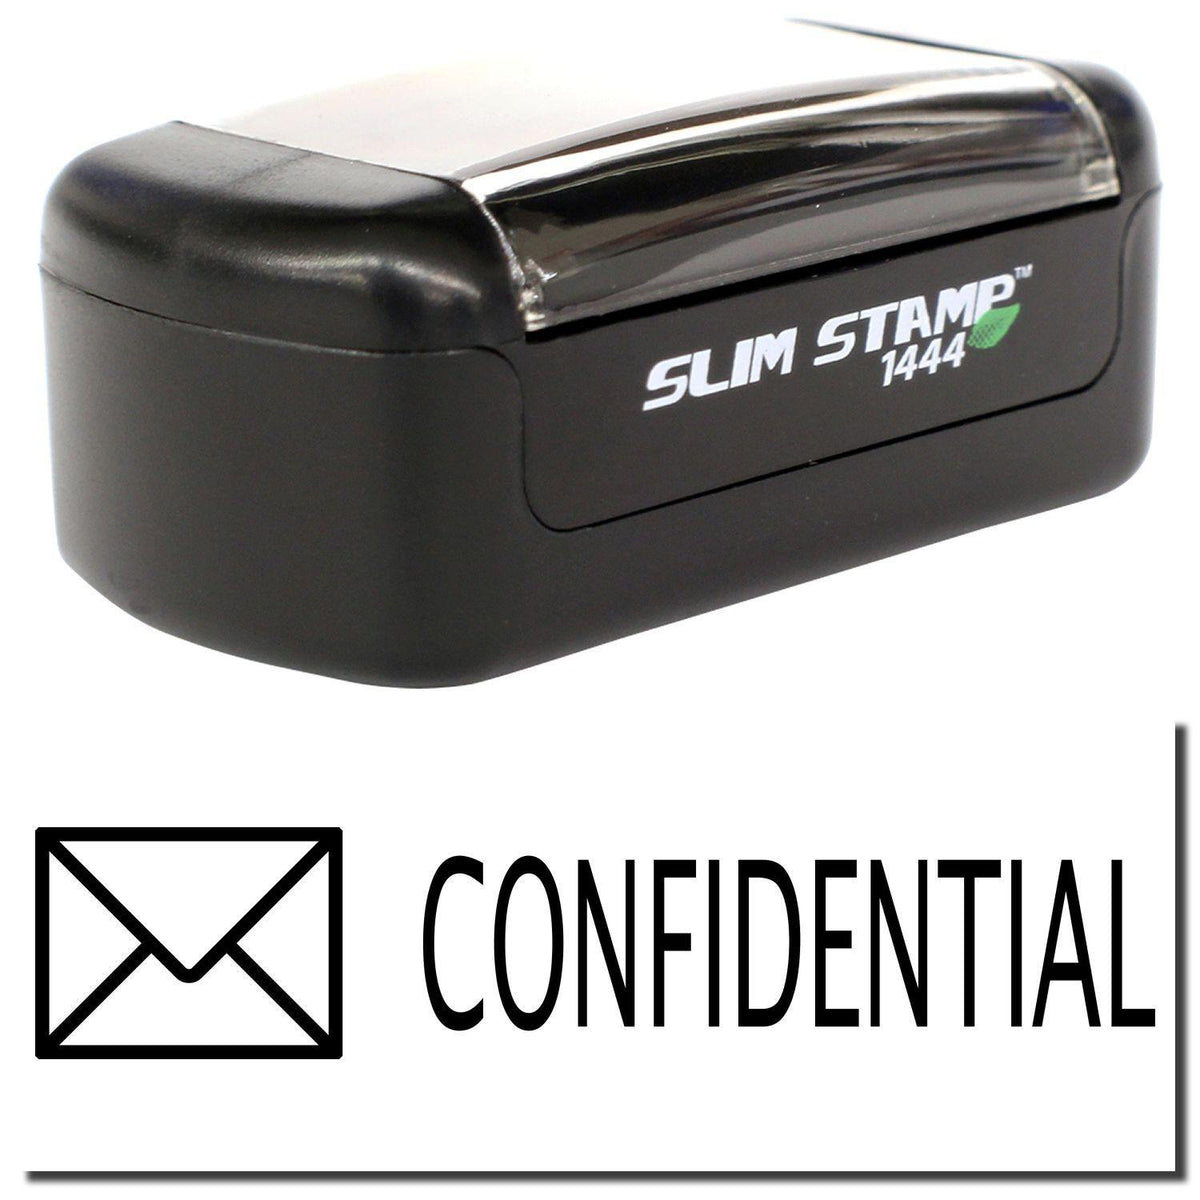 A stock office pre-inked stamp with a stamped image showing how the text &quot;CONFIDENTIAL&quot; with an envelope image on the left side is displayed after stamping.